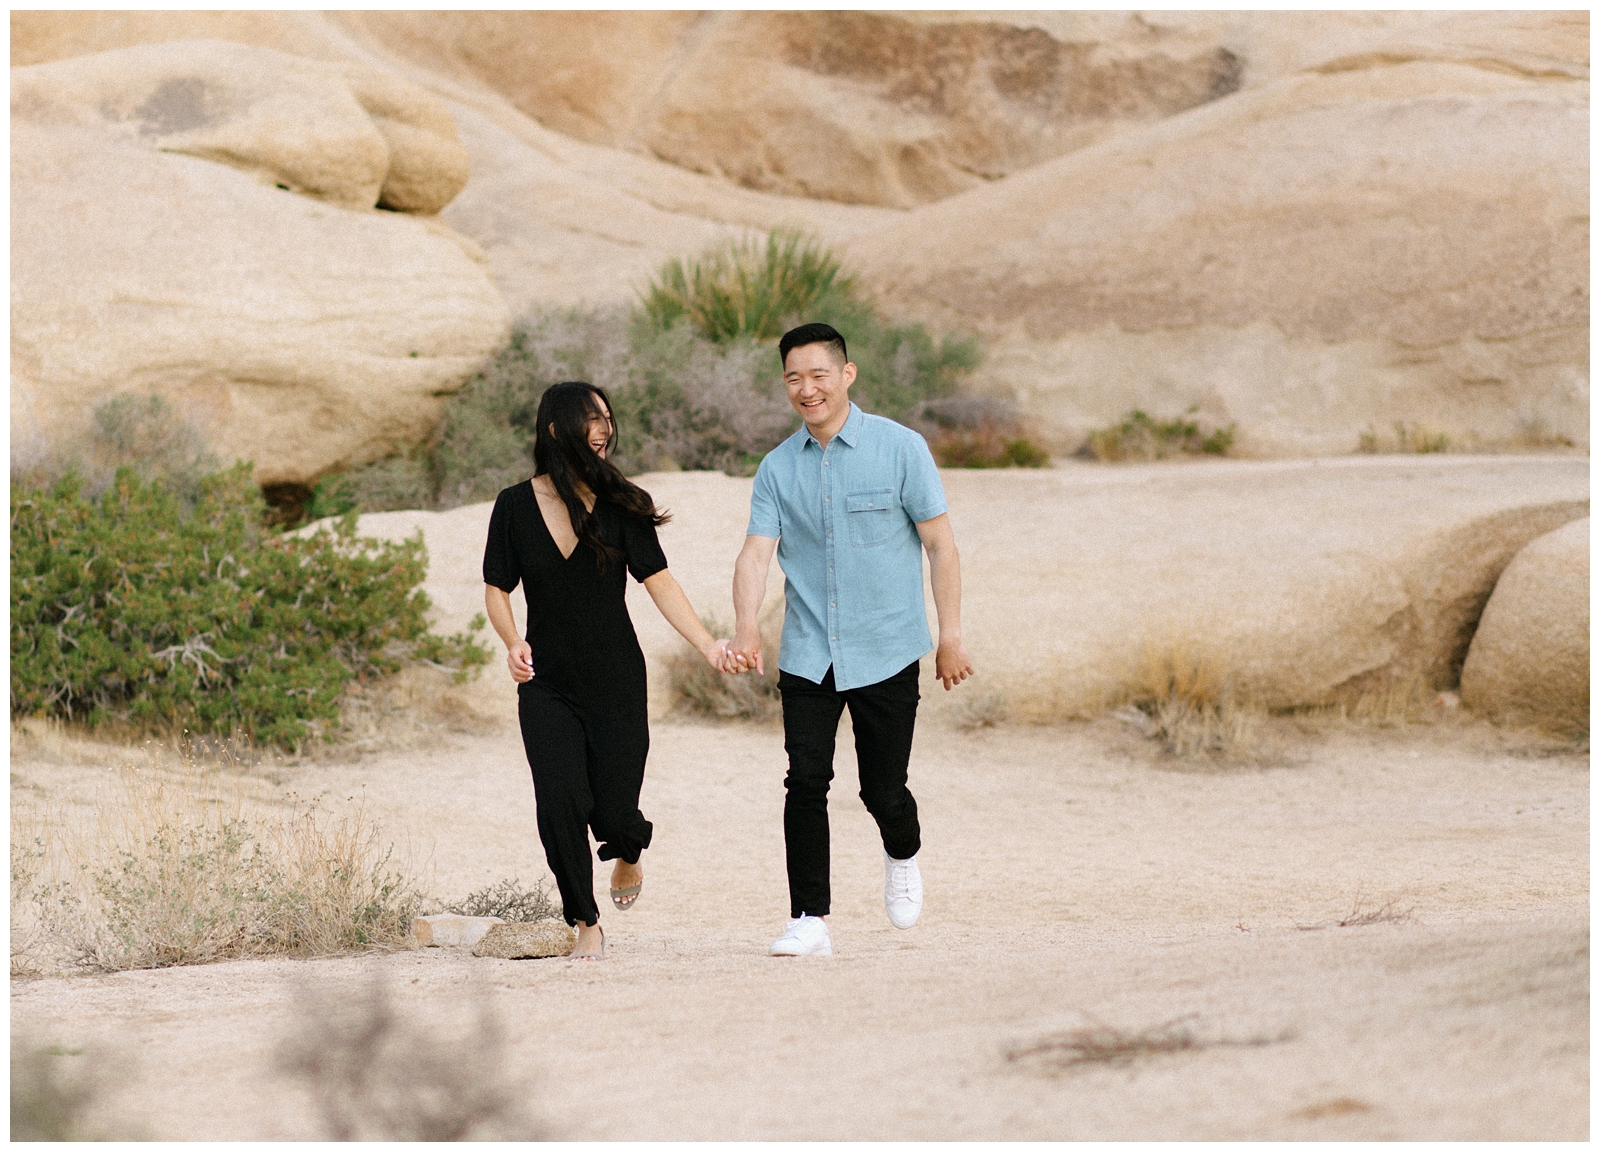 Engagement session in Joshua Tree